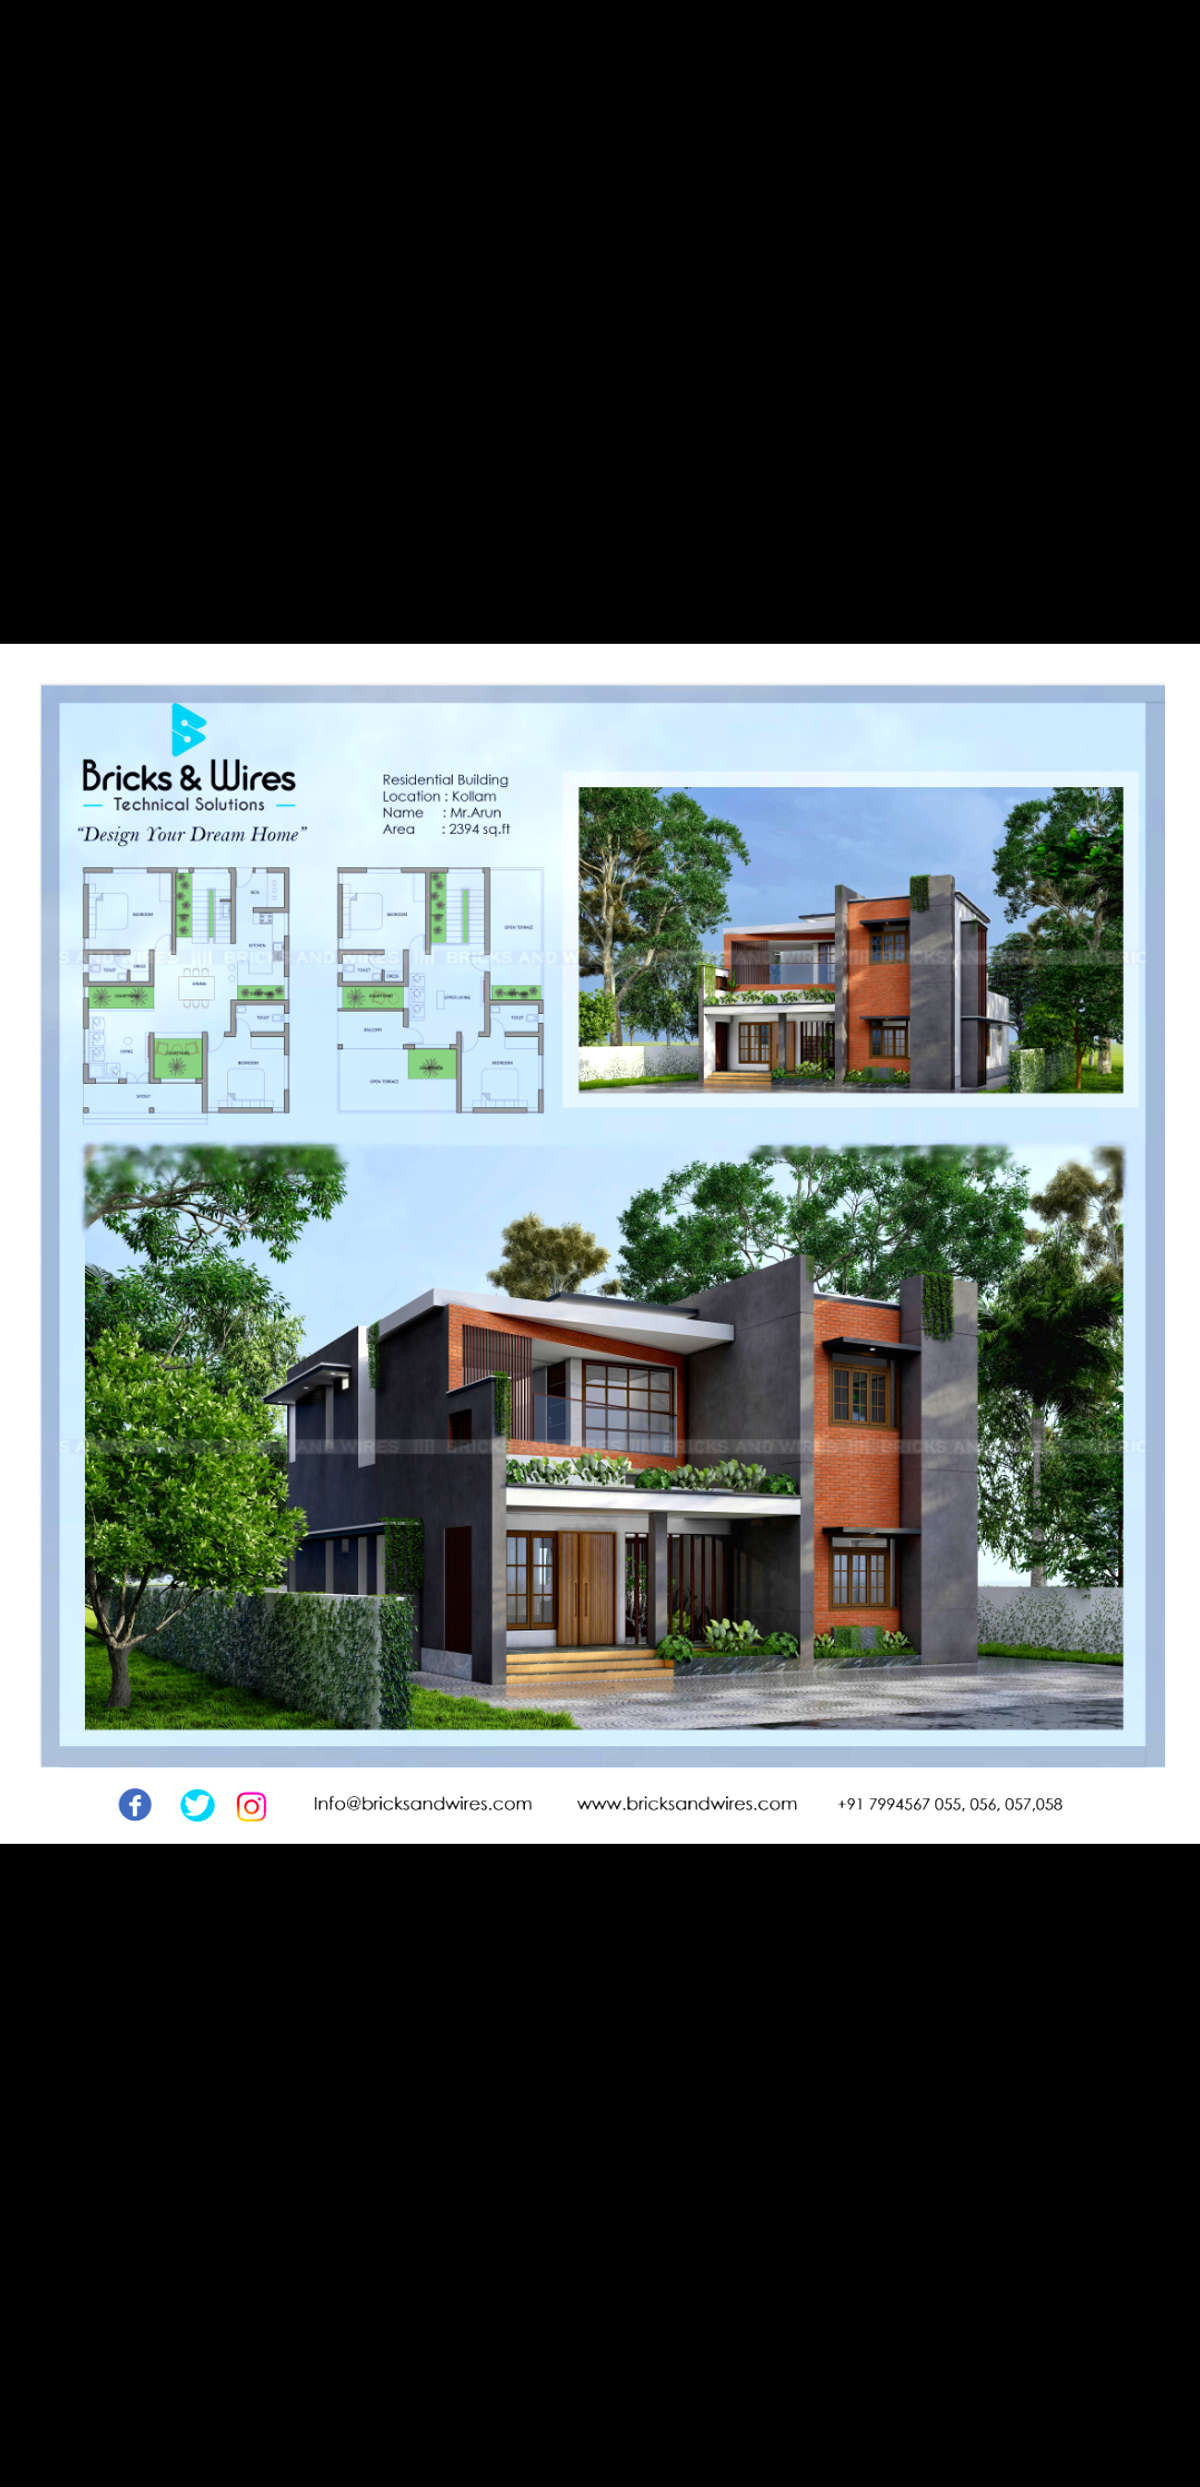 "Beauty perishes in life, but is immortal in art"-Leonardo Da Vinci
A four Bedroom House designed for our client Mr. Arun
Total area:2394 sqft
Place:Kollam

 #Architect #architecturedesigns #exteriors #InteriorDesigner #HouseDesigns #Designs #exteriordesing #exteriordesigns #exterior3D #ElevationHome #FloorPlans #HouseConstruction #bricksandwires